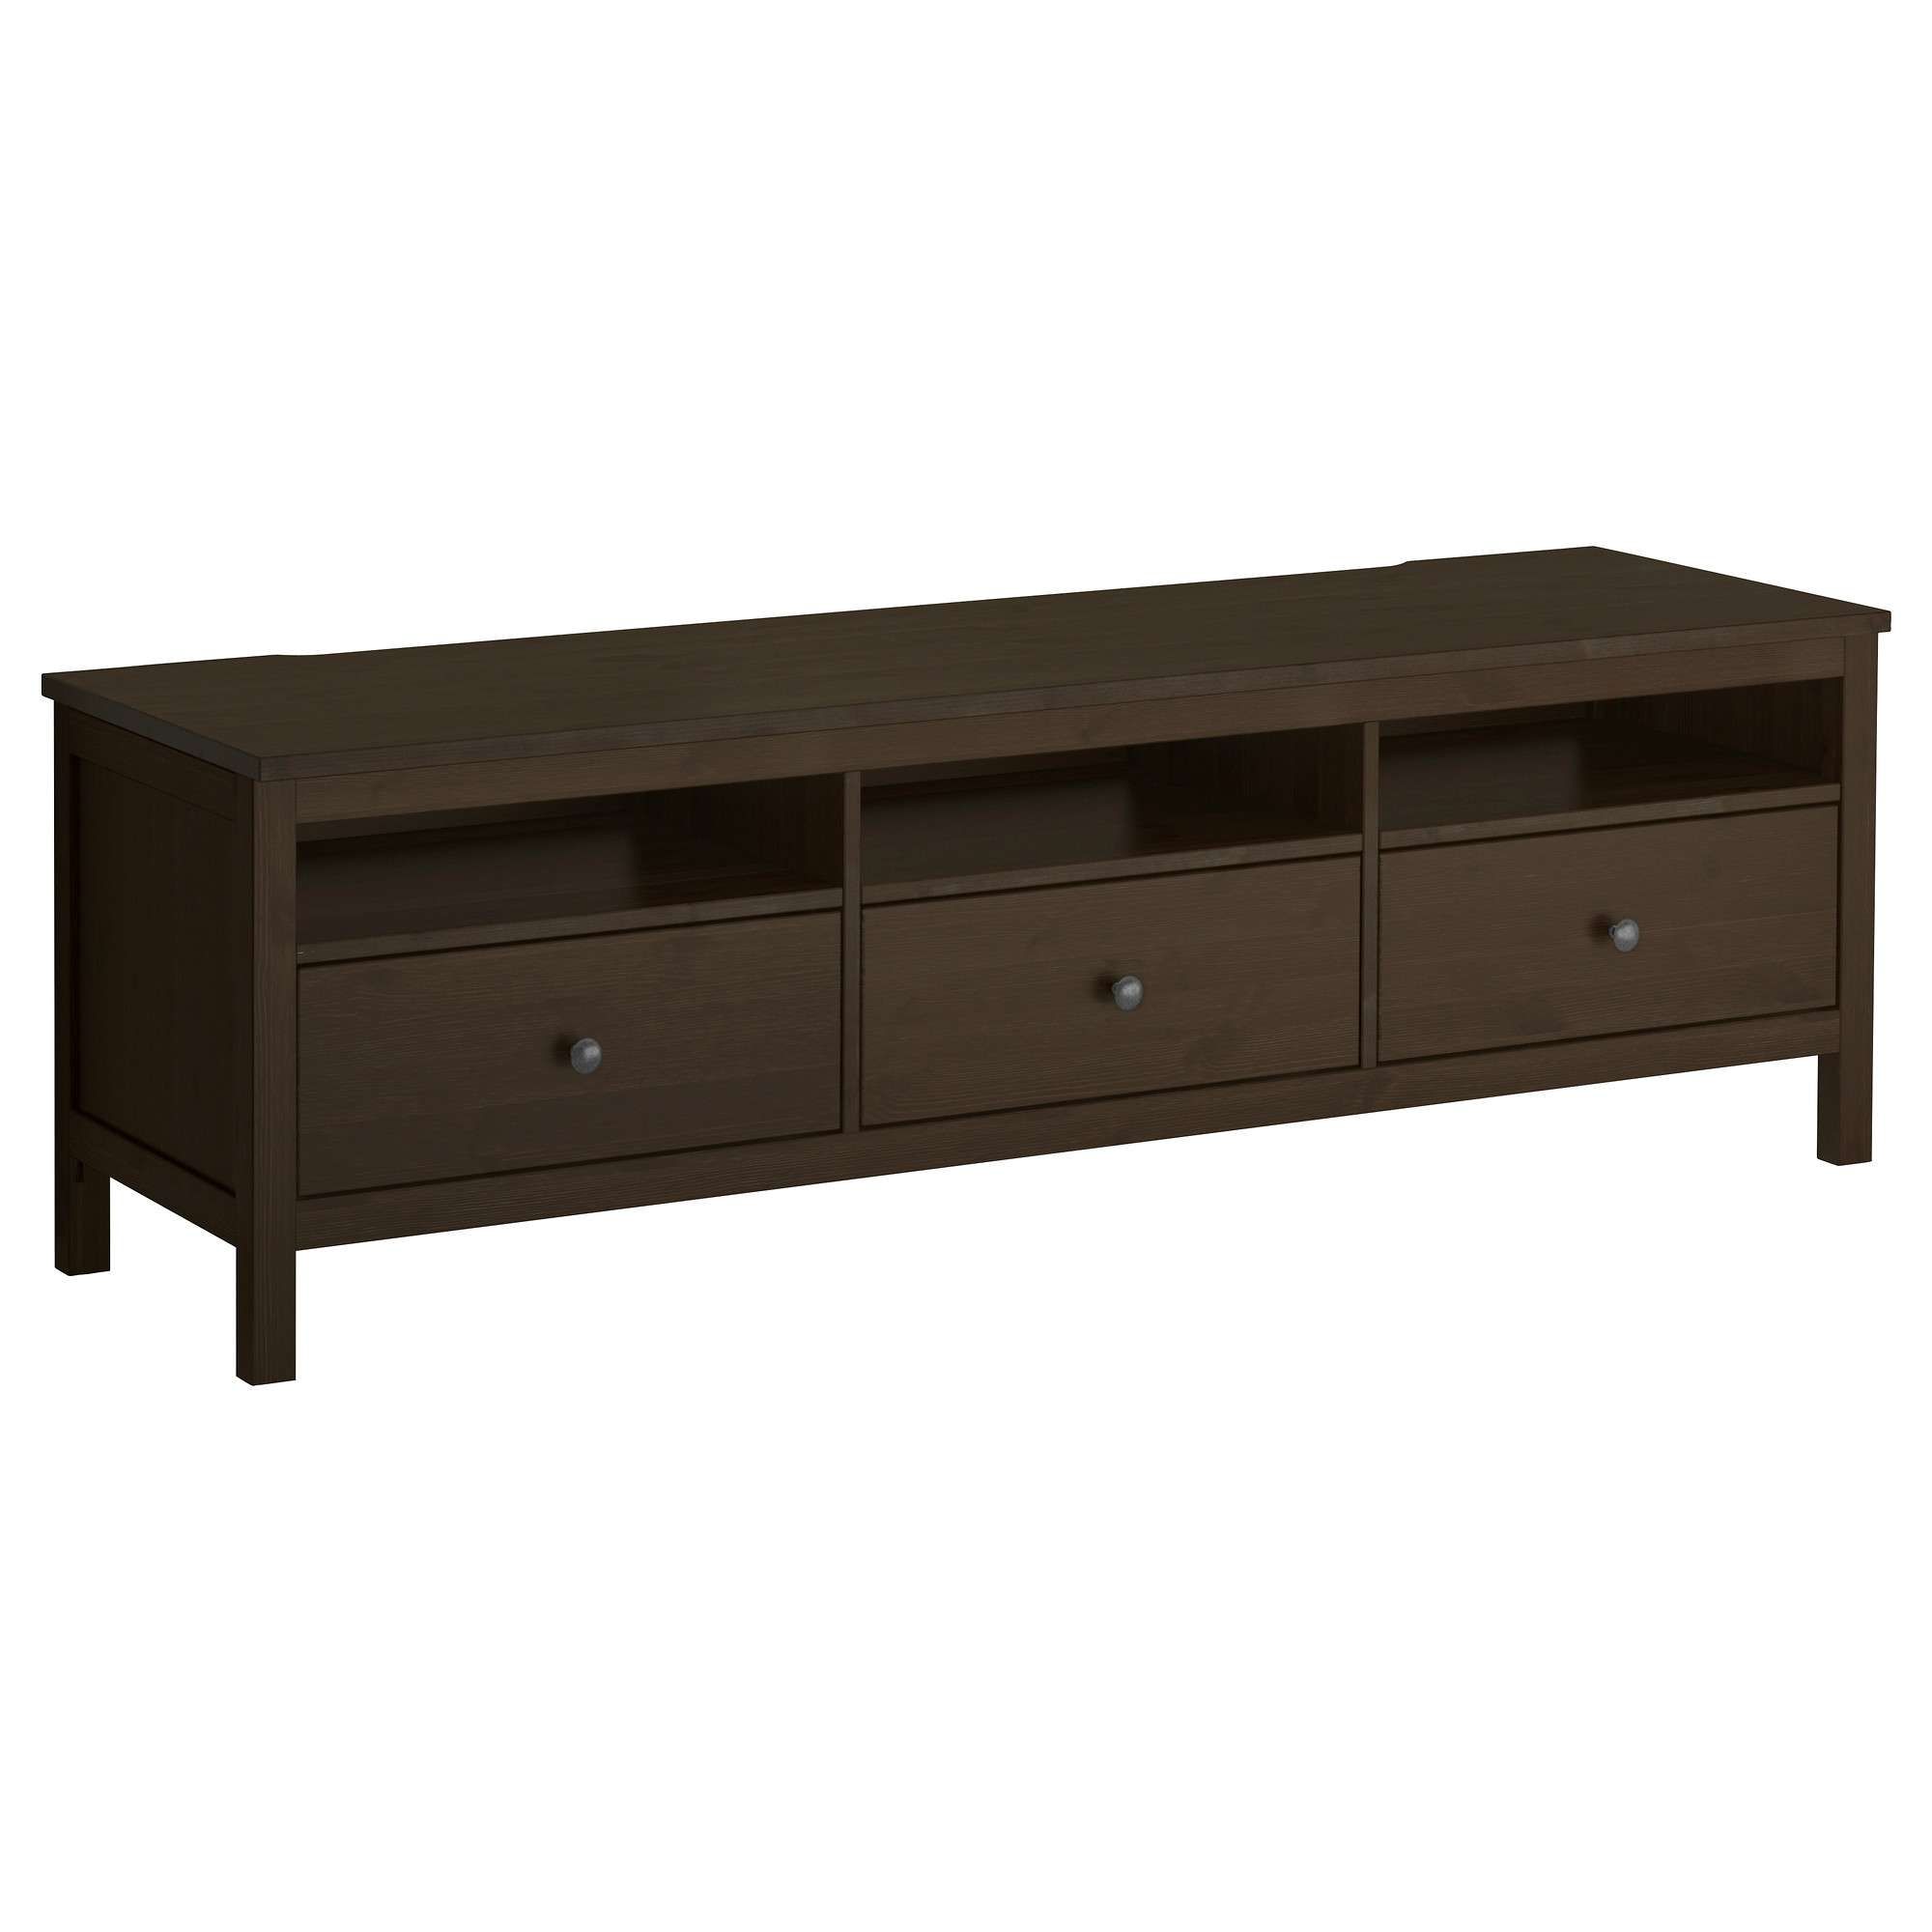 Hemnes Tv Bench – Black Brown – Ikea For Bench Tv Stands (View 8 of 15)